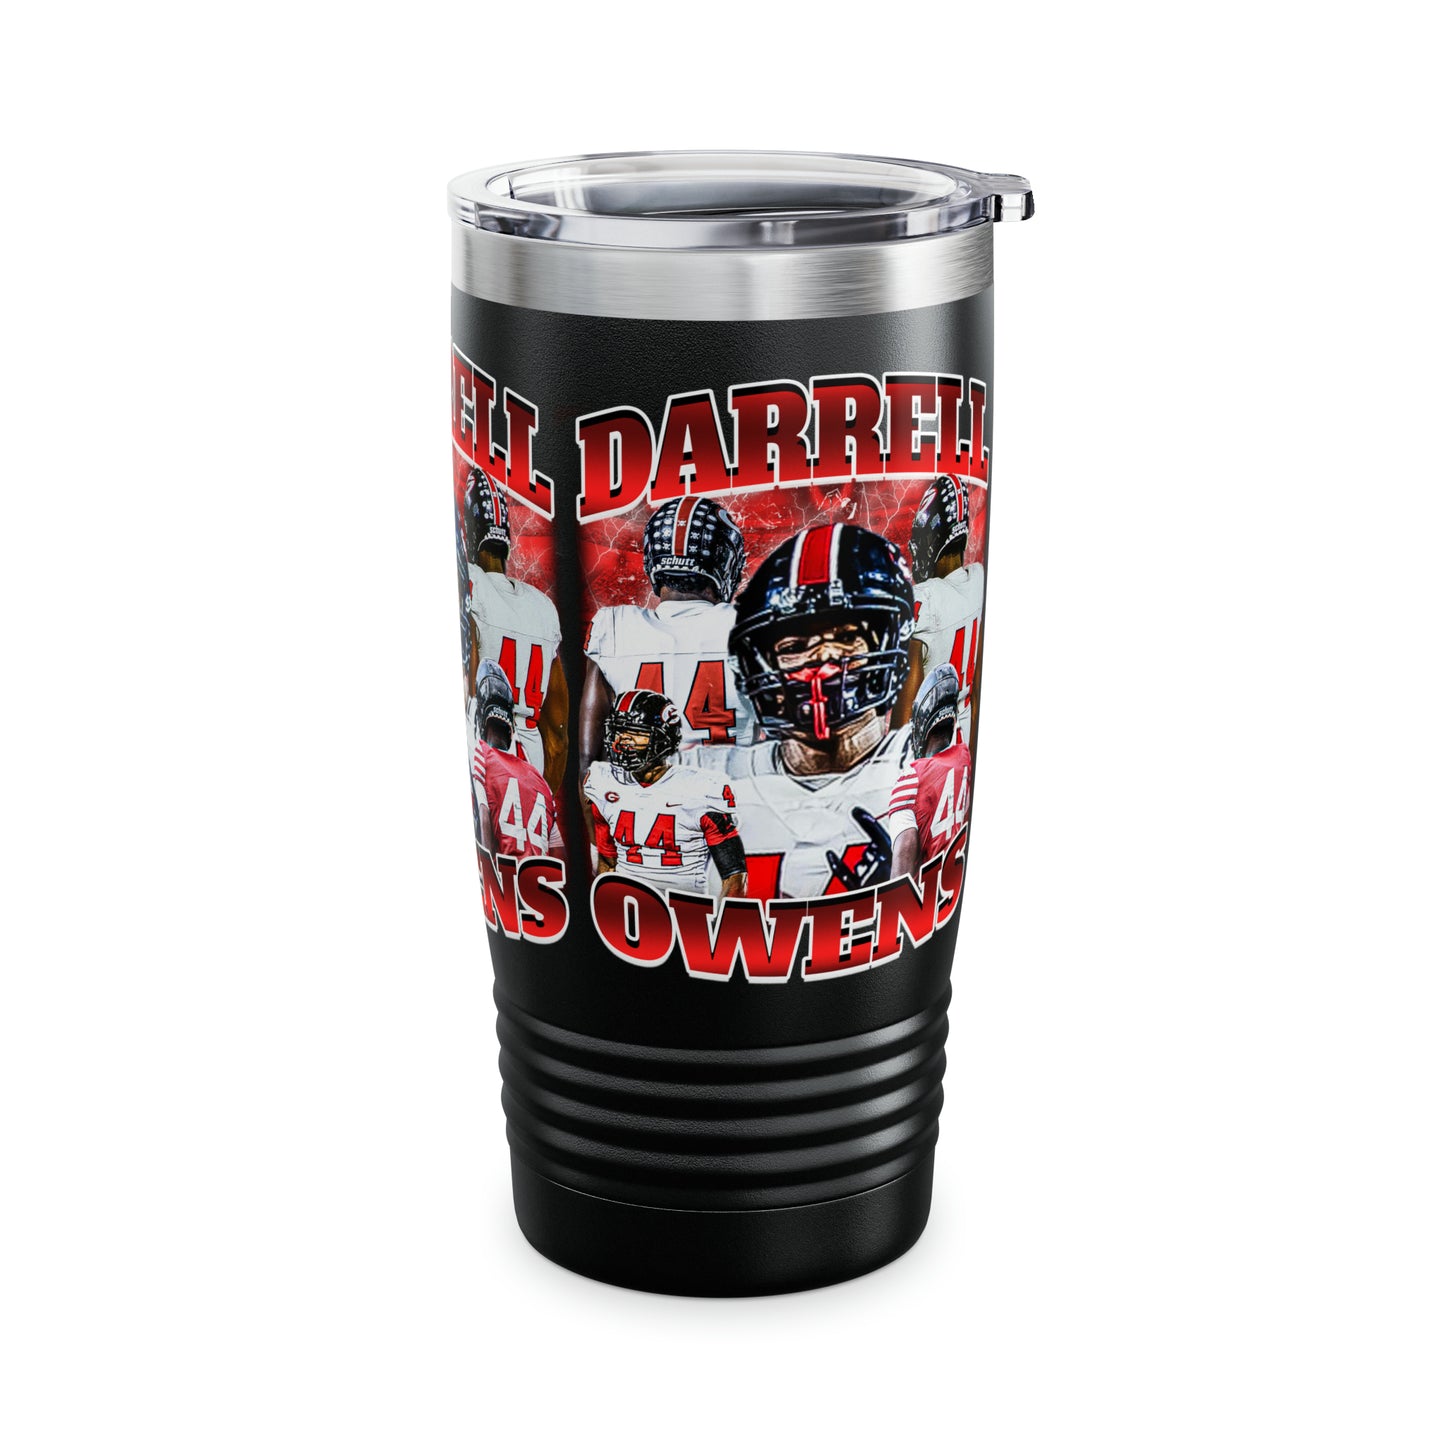 Darrell Owens Stainless Steel Tumbler